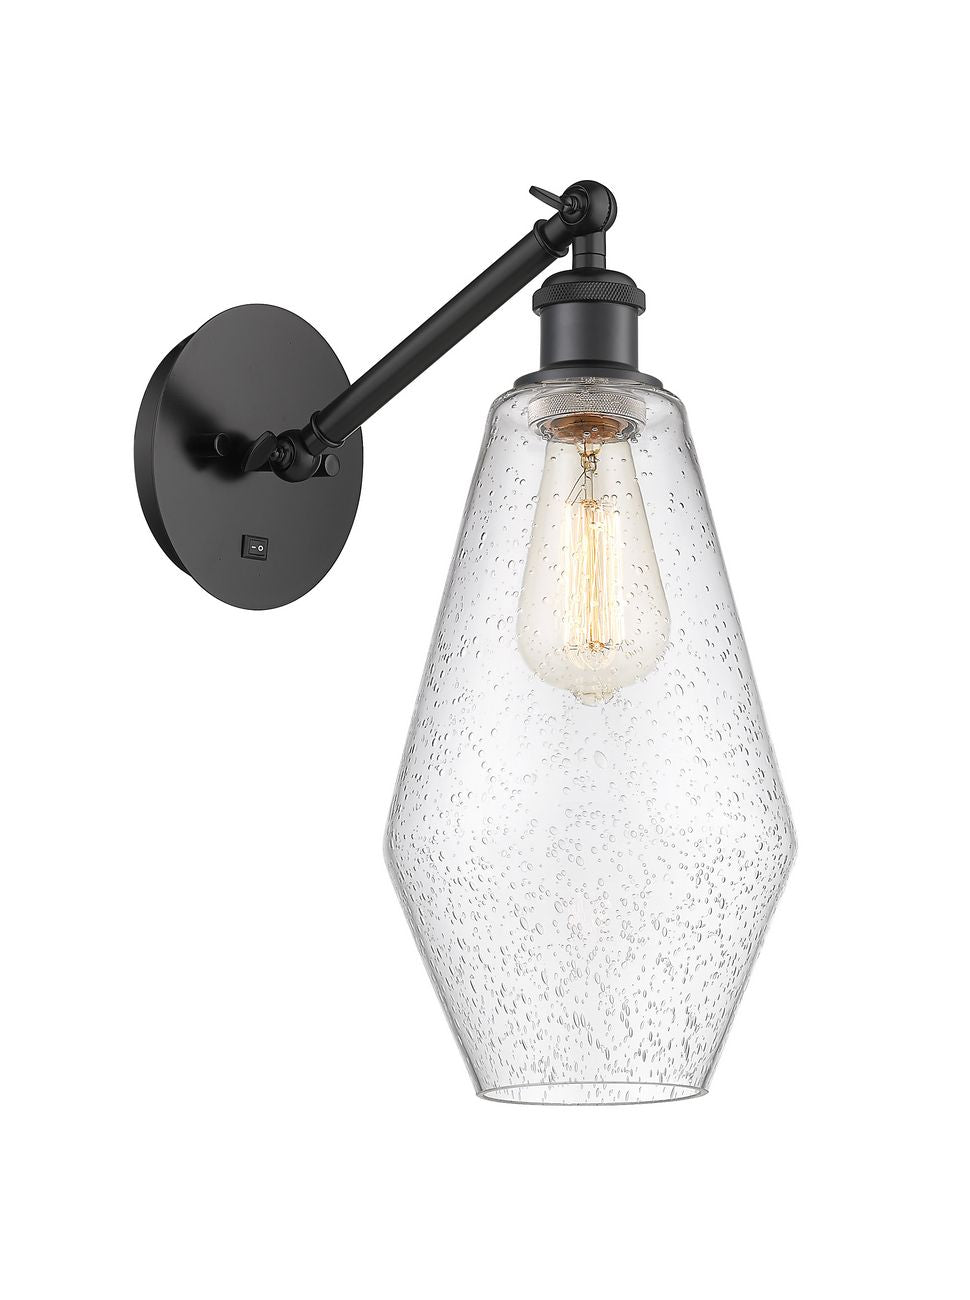 317-1W-BK-G654-7 1-Light 7" Matte Black Sconce - Seedy Cindyrella 7" Glass - LED Bulb - Dimmensions: 7 x 13.25 x 16 - Glass Up or Down: Yes